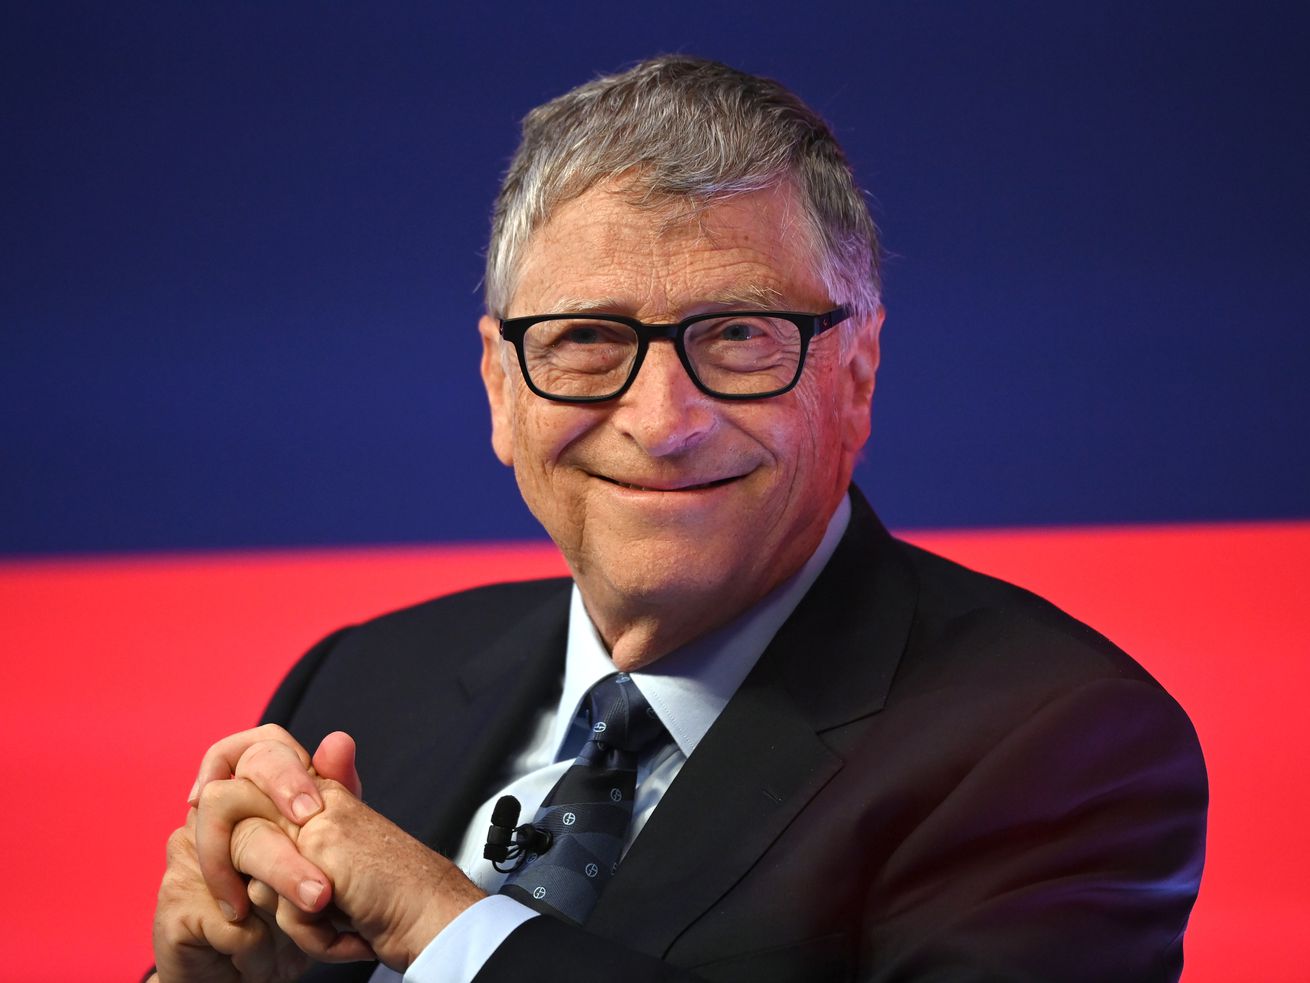 Bill Gates smiling and sitting onstage in front of a red and blue background.